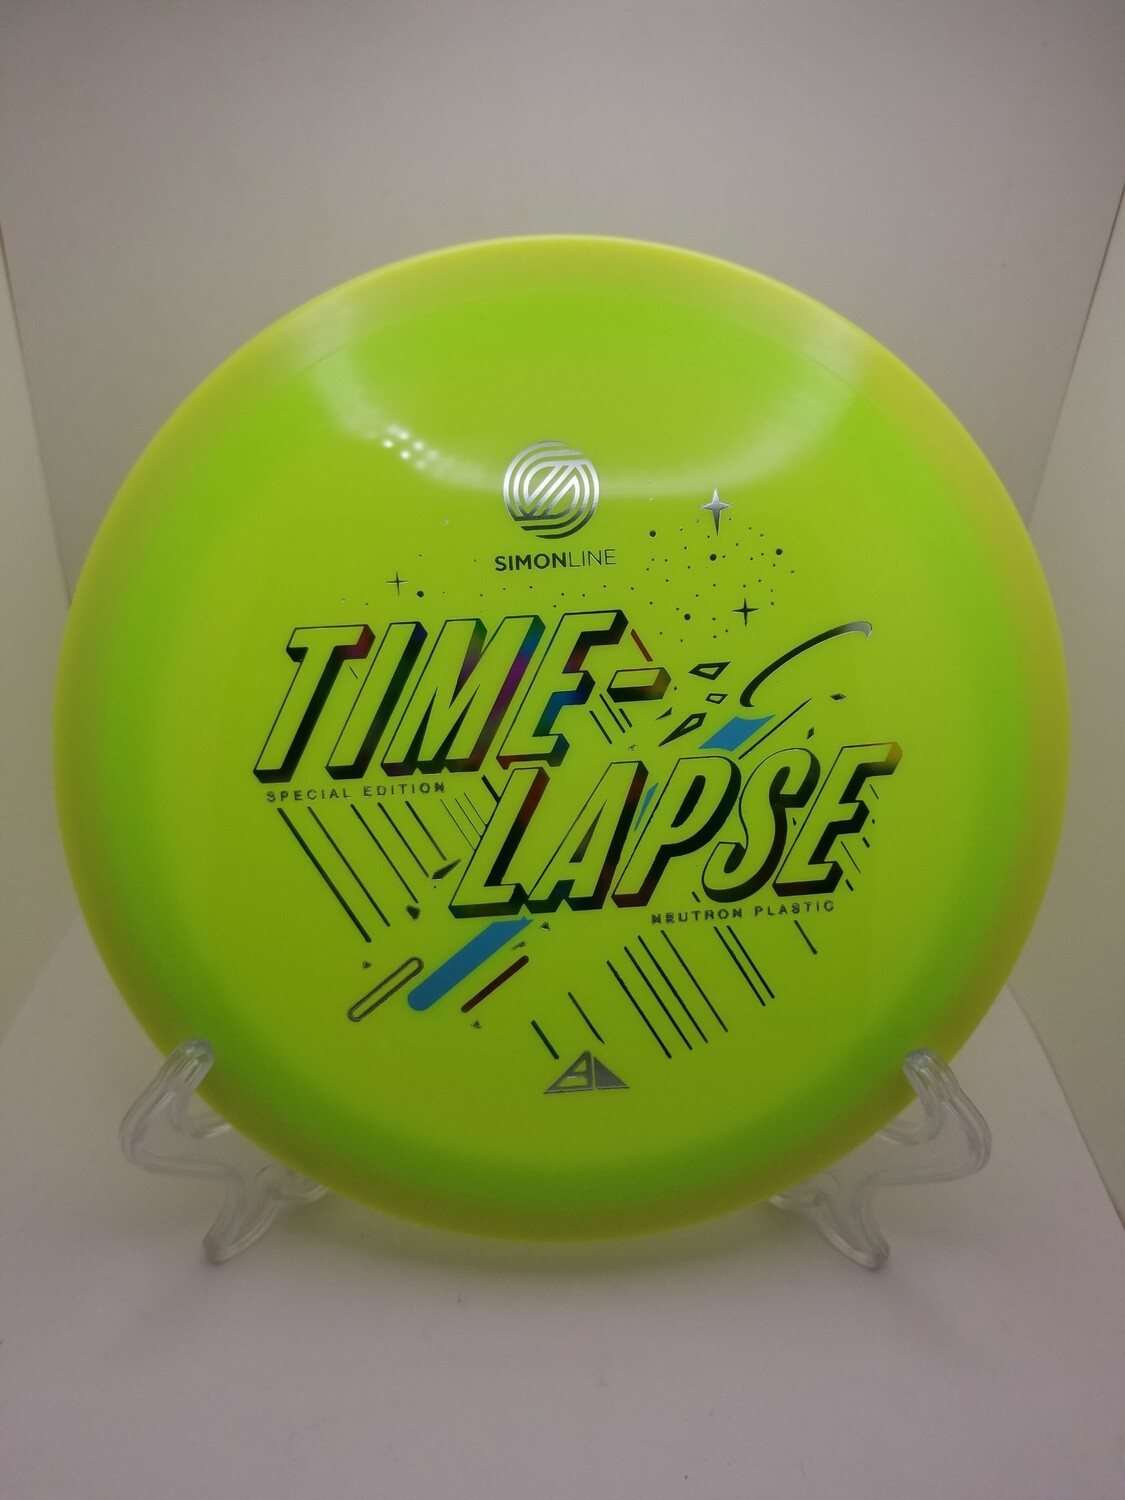 Axiom Discs Special Edition Time Lapse Dayglow Green Plate and Swirly Yellow Rim Neutron 173g. Simon Line